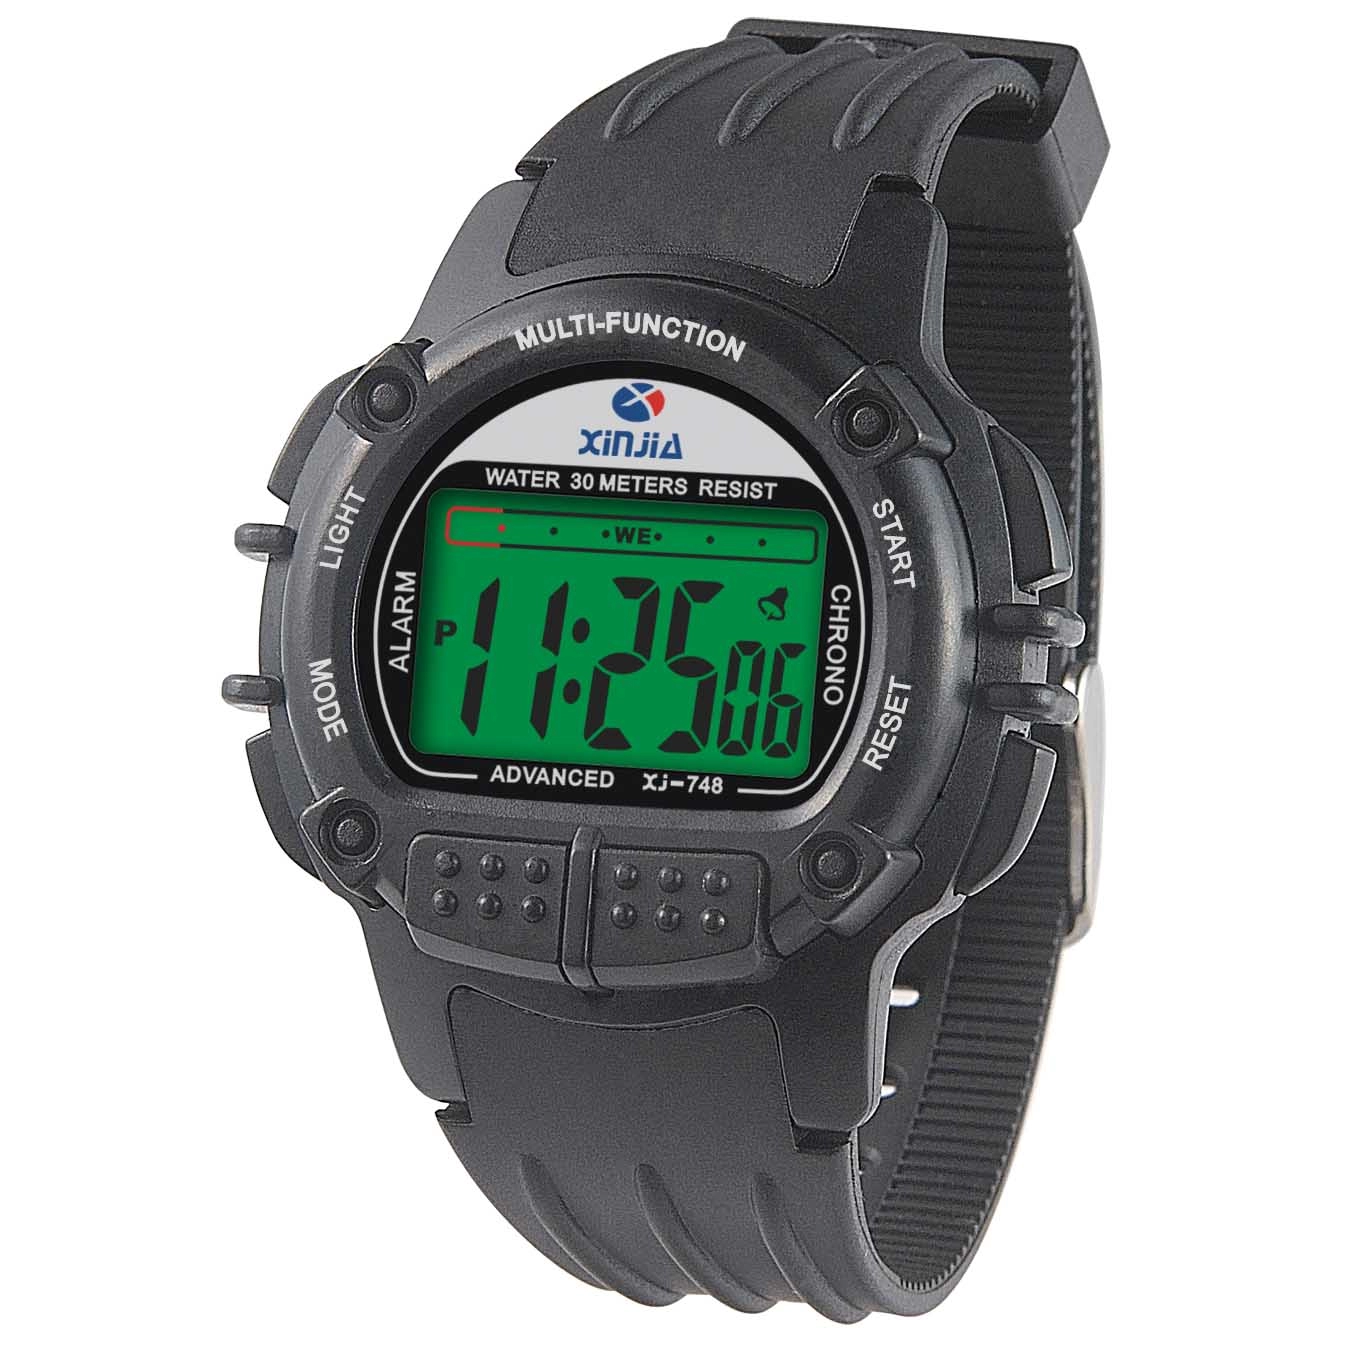 Promotional Water Resistant Wrist Watch